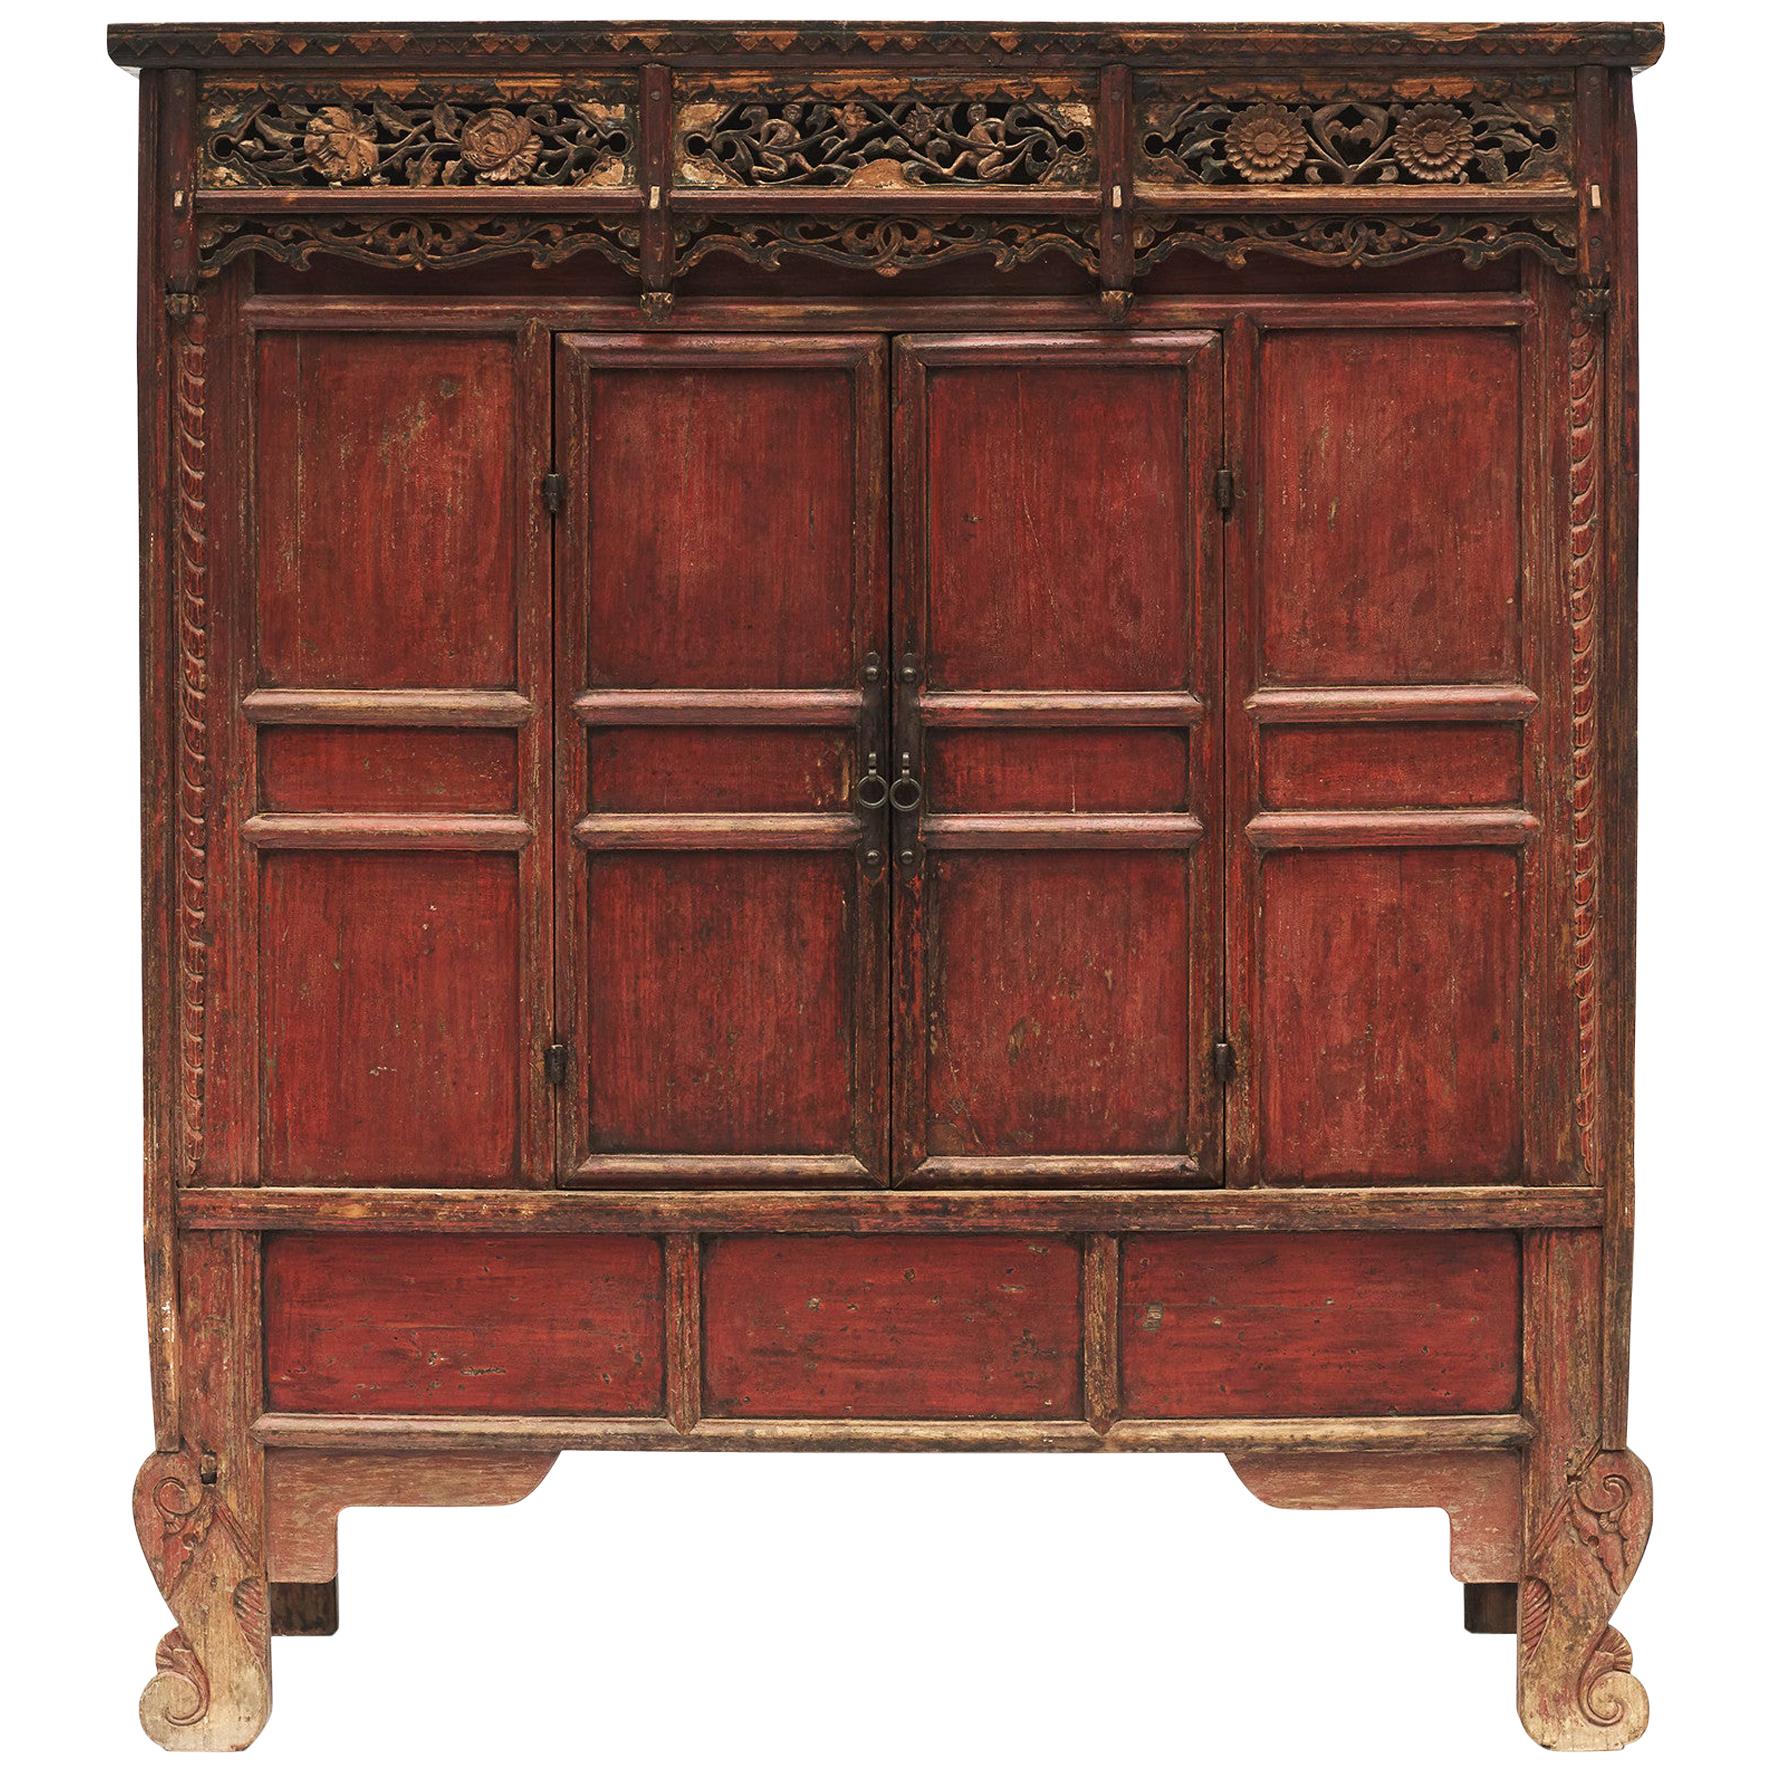 Antique 15th-16th Century Ming Dynasty Cabinet